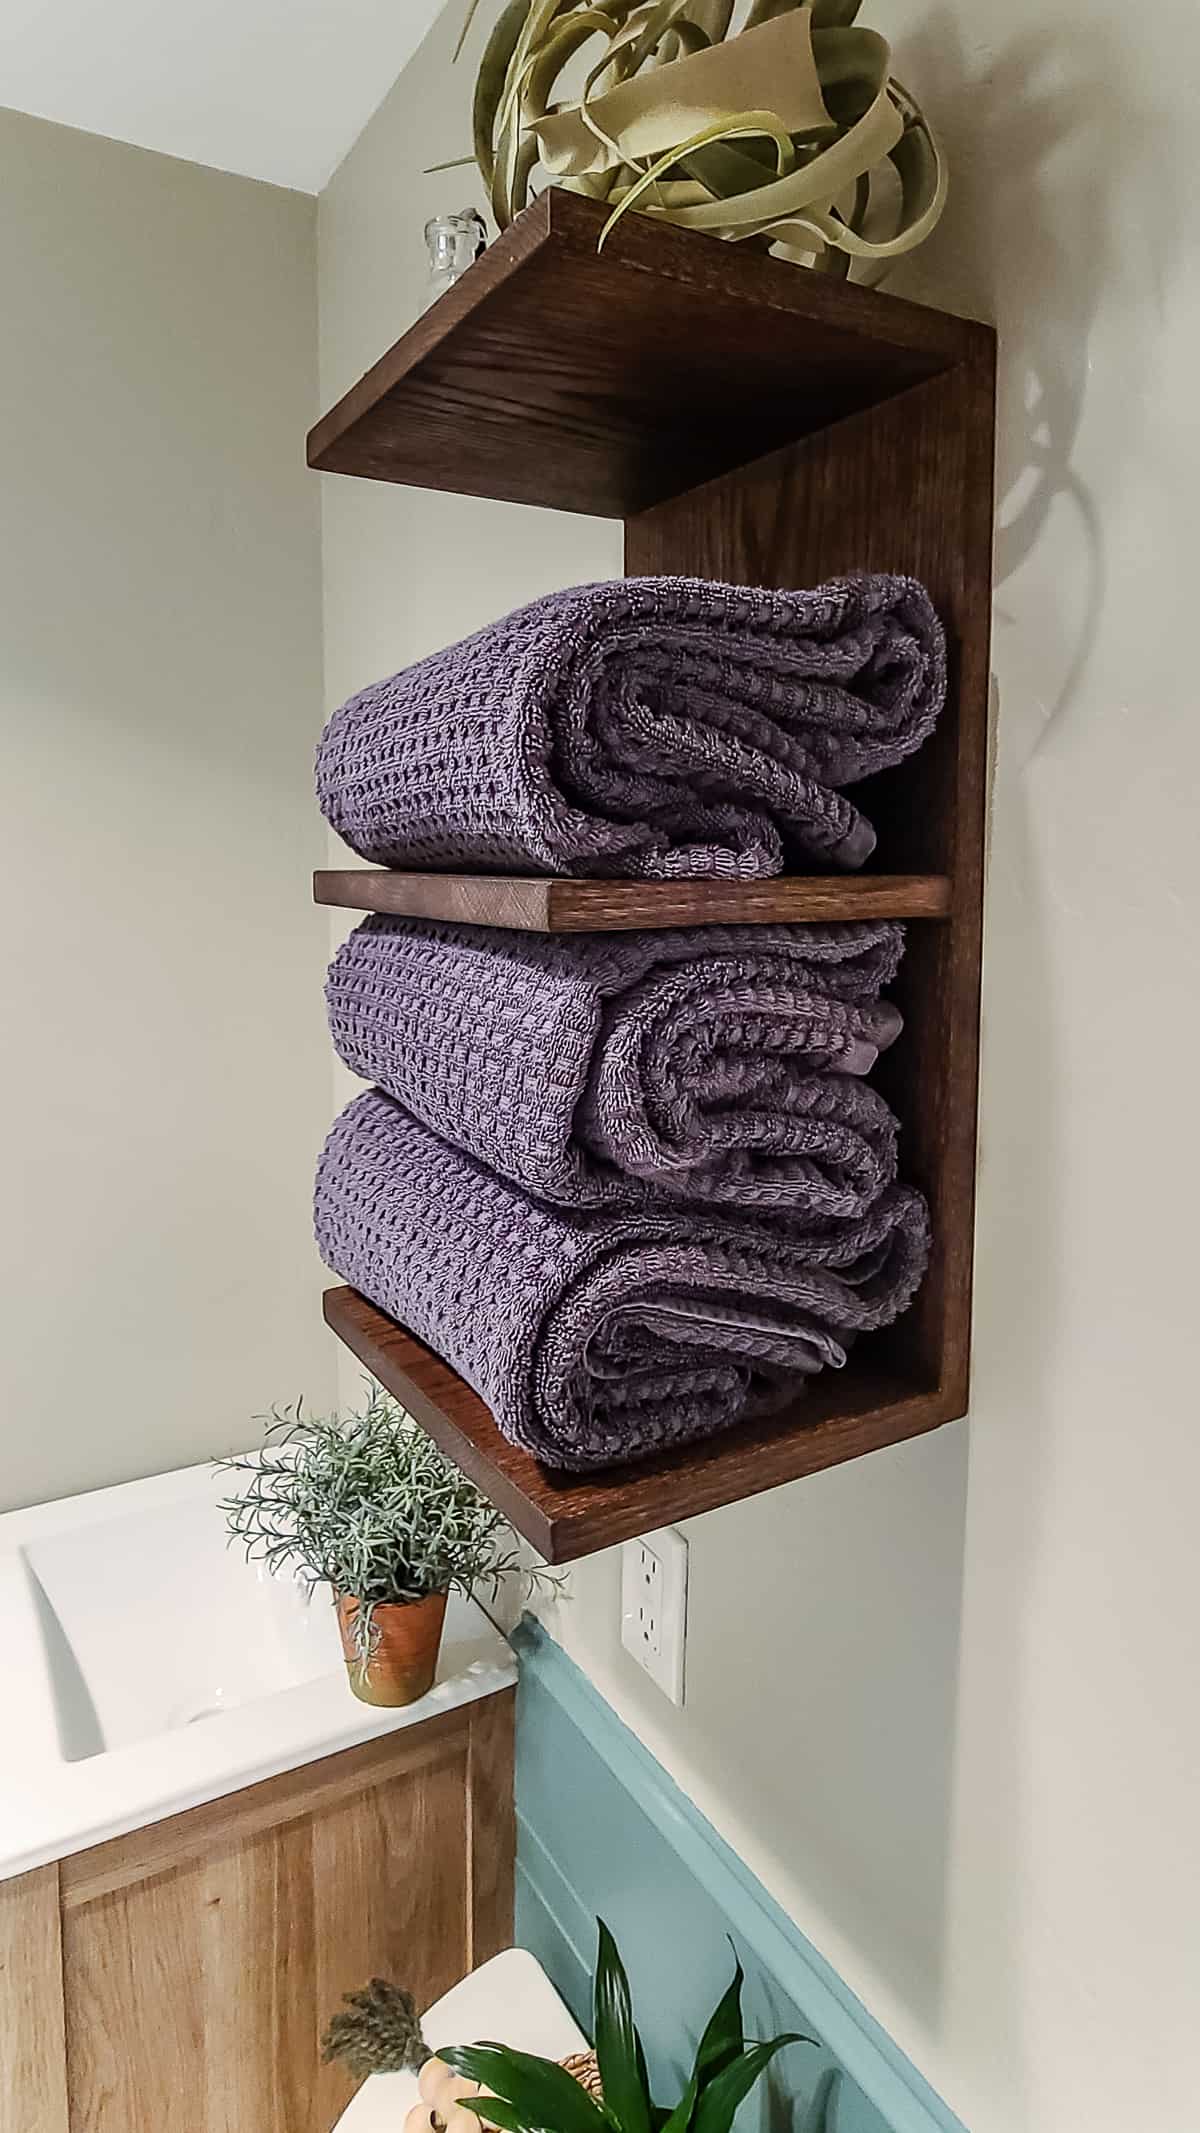 15 DIY Towel Holders to Spruce Up Your Bathroom